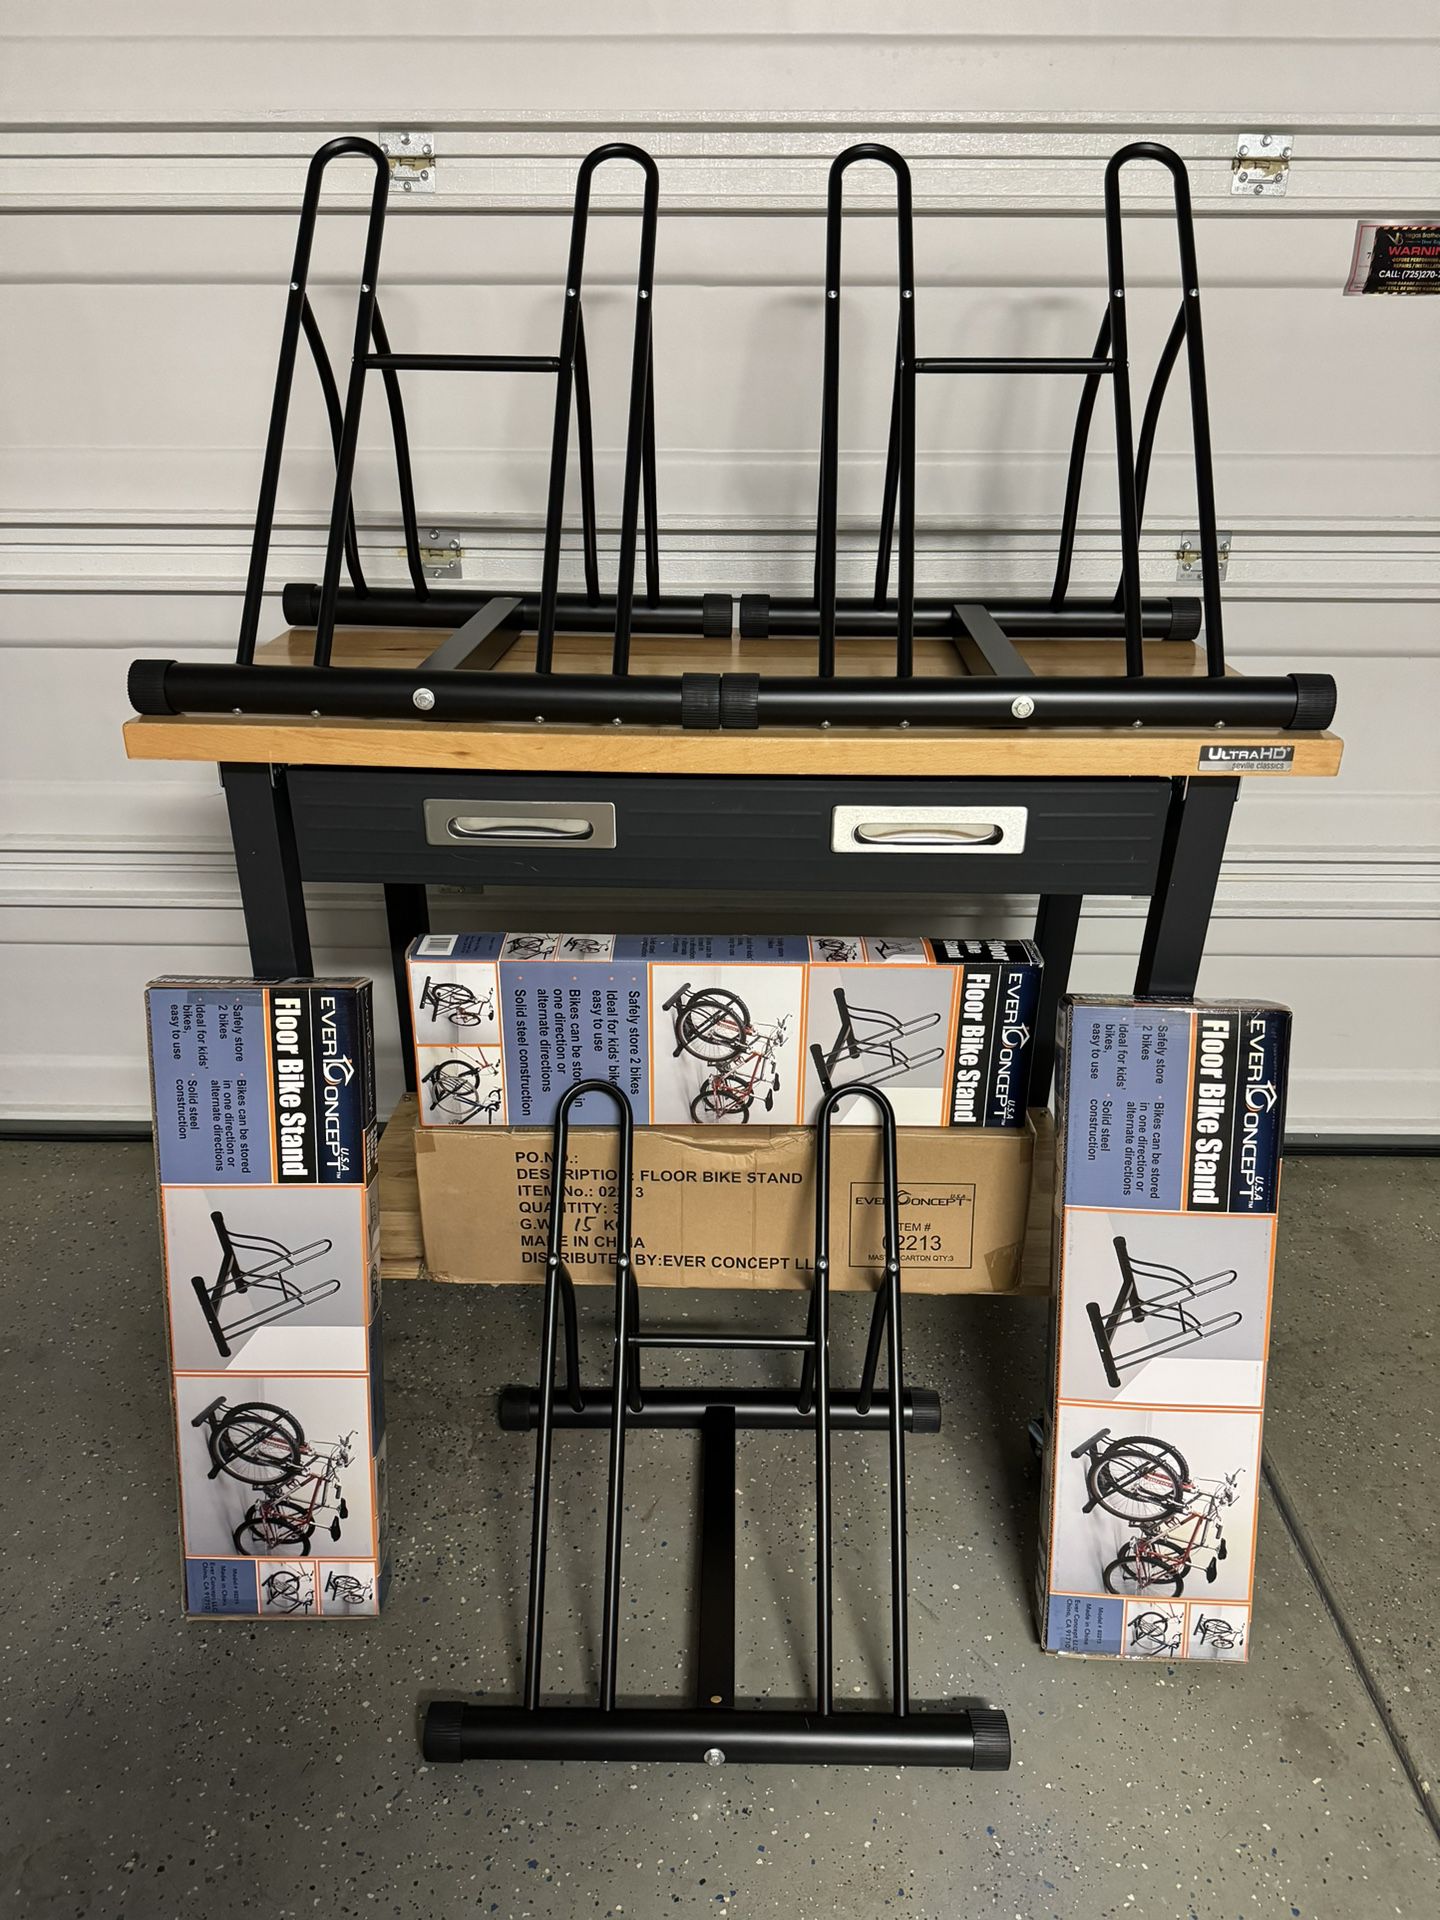 New In The Box Ever Concepts Double Bike Racks $15 Each Or Cases Of 3 For $45 Assembly Required Many Cases Available 